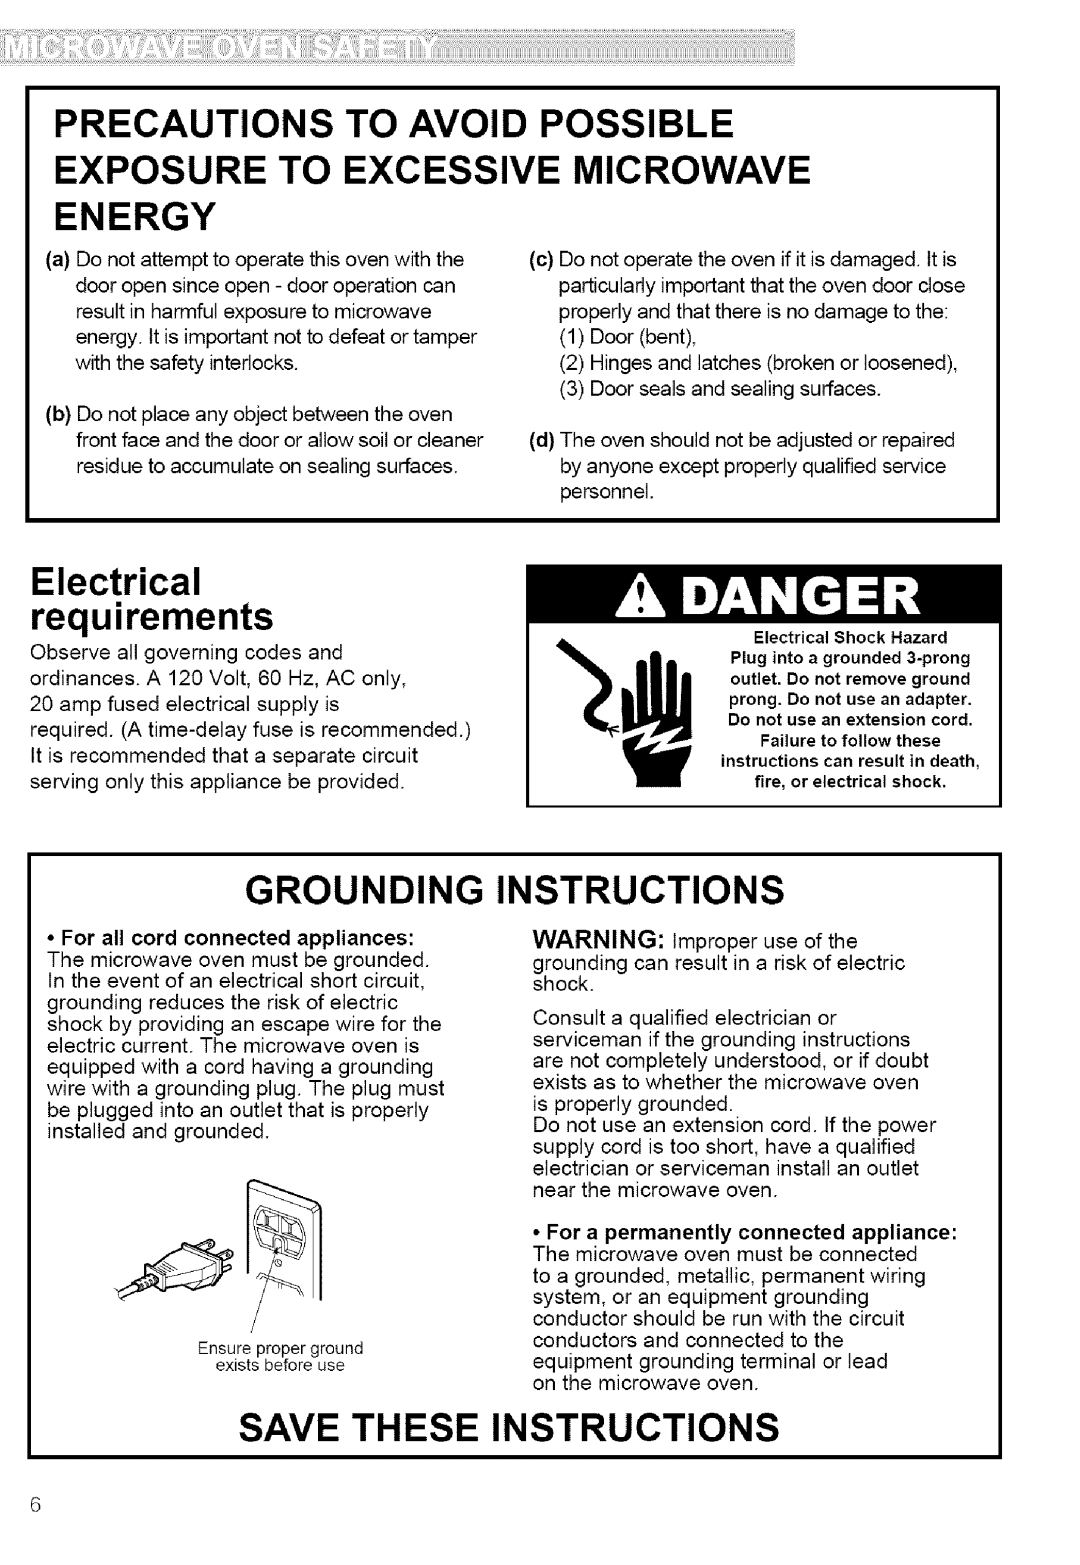 Kenmore 721.80883 manual Electrical requirements, Grounding Instructions, Precautions To Avoid Exposure To Excessive Energy 